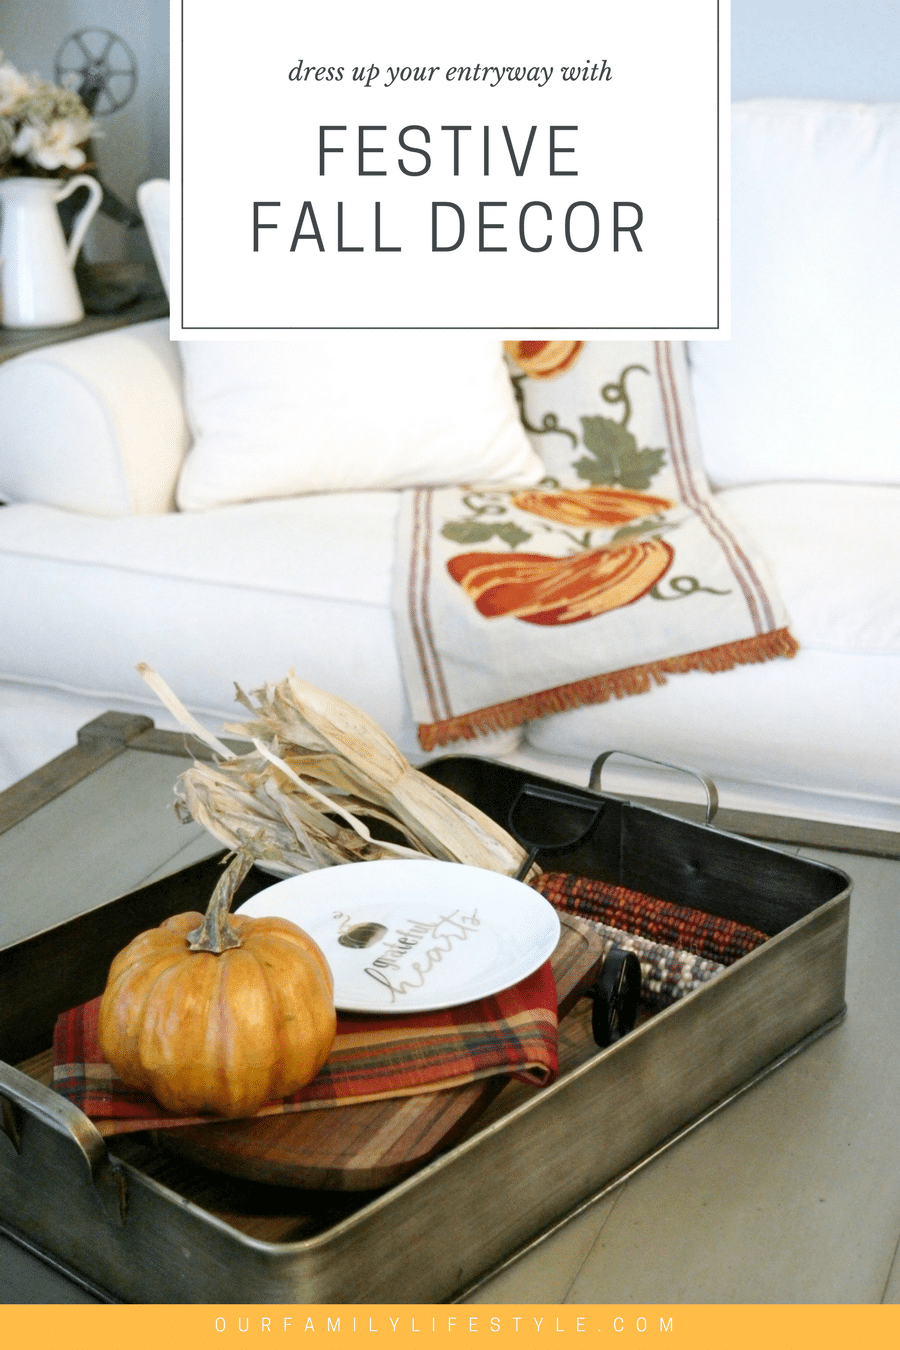 Dress Up Your Entryway with Festive Fall Decor